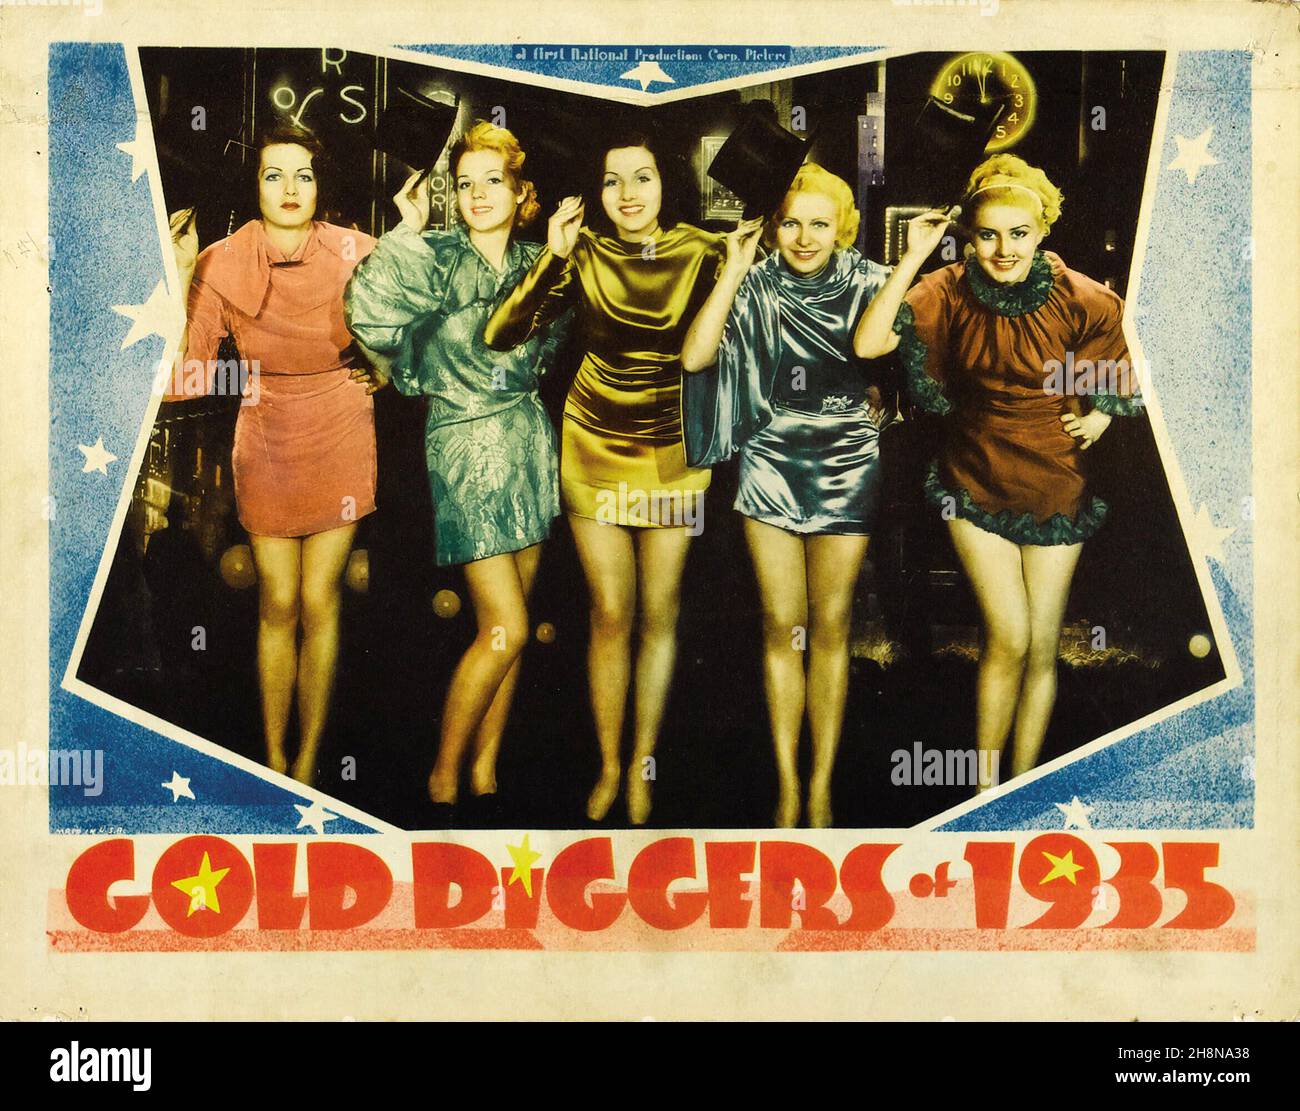 File:Gold Diggers of 1933 lobby card 3.jpg - Wikimedia Commons